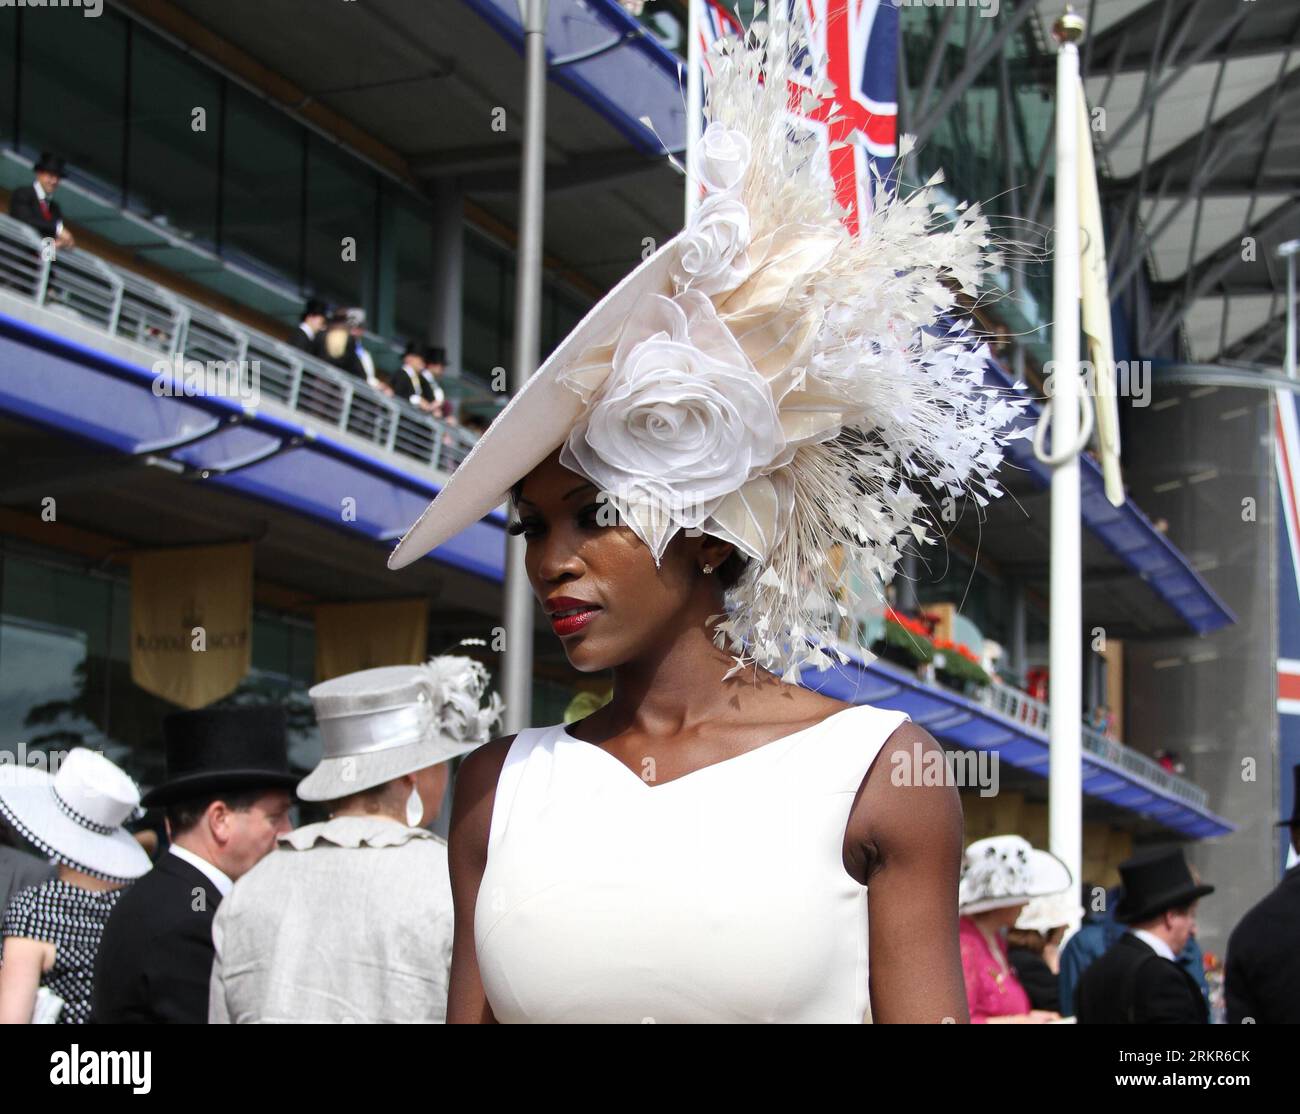 Bildnummer: 58133966  Datum: 21.06.2012  Copyright: imago/Xinhua (120622) -- London, June 21, 2012 (Xinhua) -- A woman wearing hat is seen on the Royal Ascot, in Ascot, Berkshire, UK, June 21, 2012. Dated from 1711, the annual Royal Ascot week is one of Europe s most famous horse racing event. The Thursday in every Royal Ascot week is the traditional Ladies Day, on which spectating ladies specially wear beautiful hats for the Gold Cup race. (Xinhua/Zhang Yuenan) (zy) UK-ROYAL ASCOT-LADIES DAY PUBLICATIONxNOTxINxCHN Entertainment Galopp Royal Ascot Mode xjh x0x premiumd 2012 quer     58133966 D Stock Photo